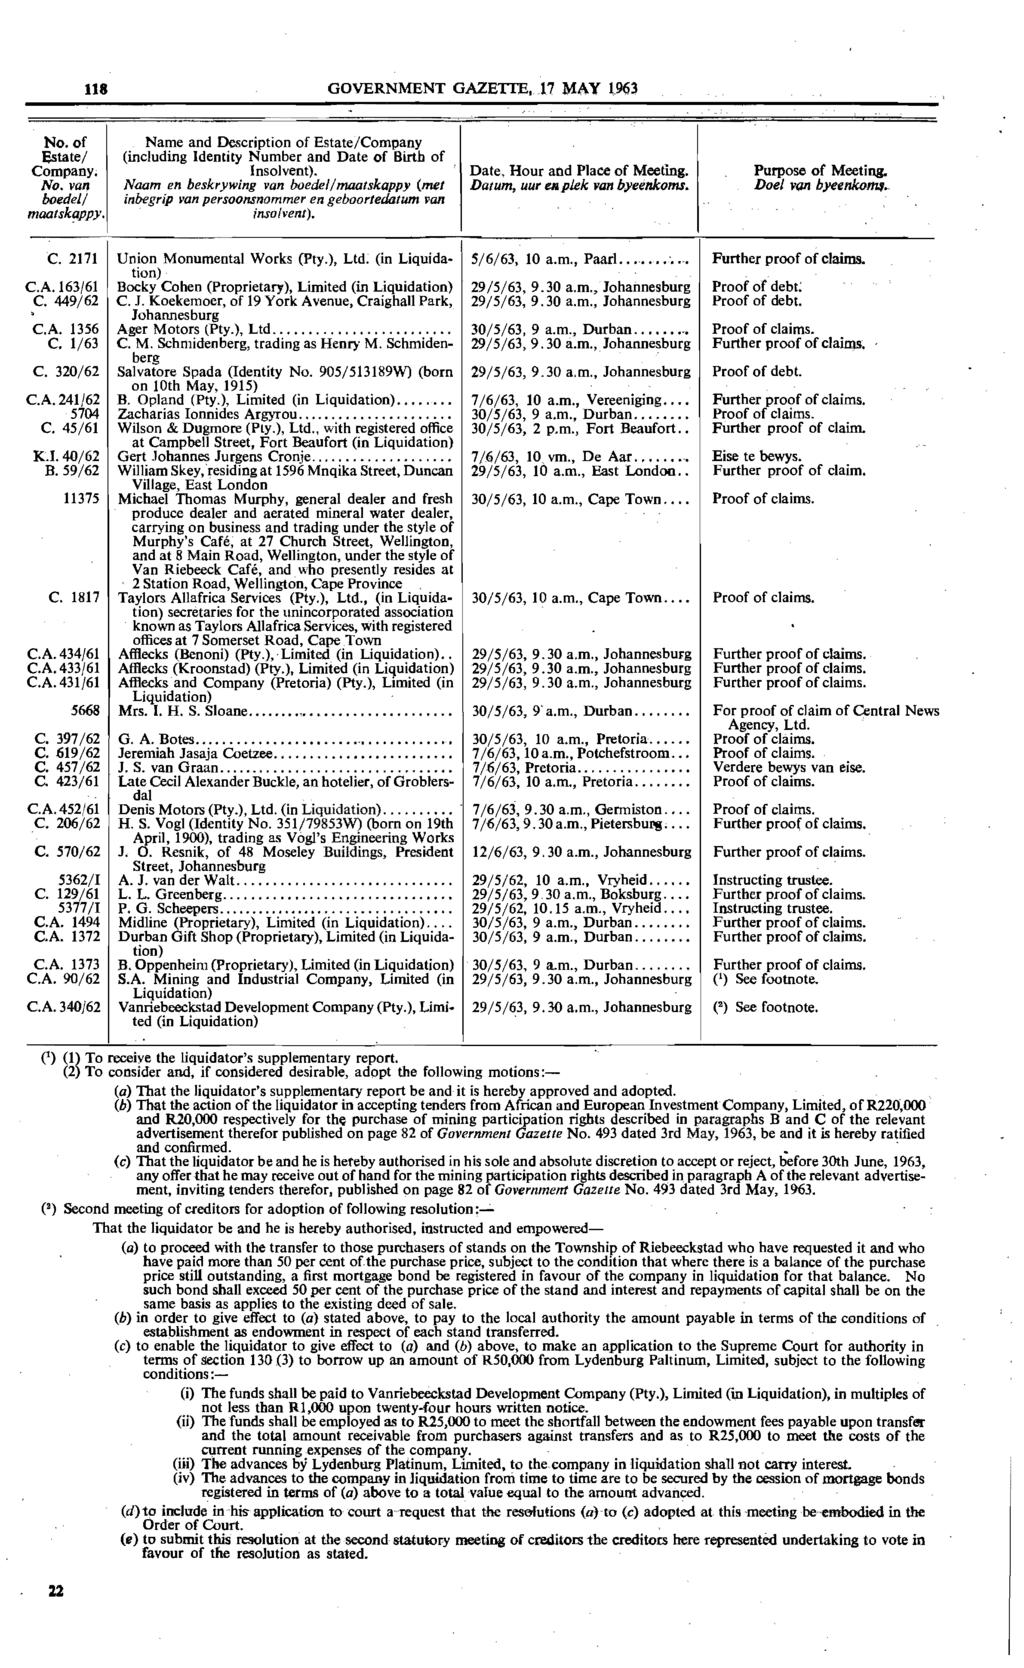 118 GOVERNMENT GAZETI'E. 17 MAY 1963. No. of Name and Description of Estate/Company Estate/ (including Identity Number and Date of Birth of Company; Insolvent). Date, Hour and Place of Meeting.